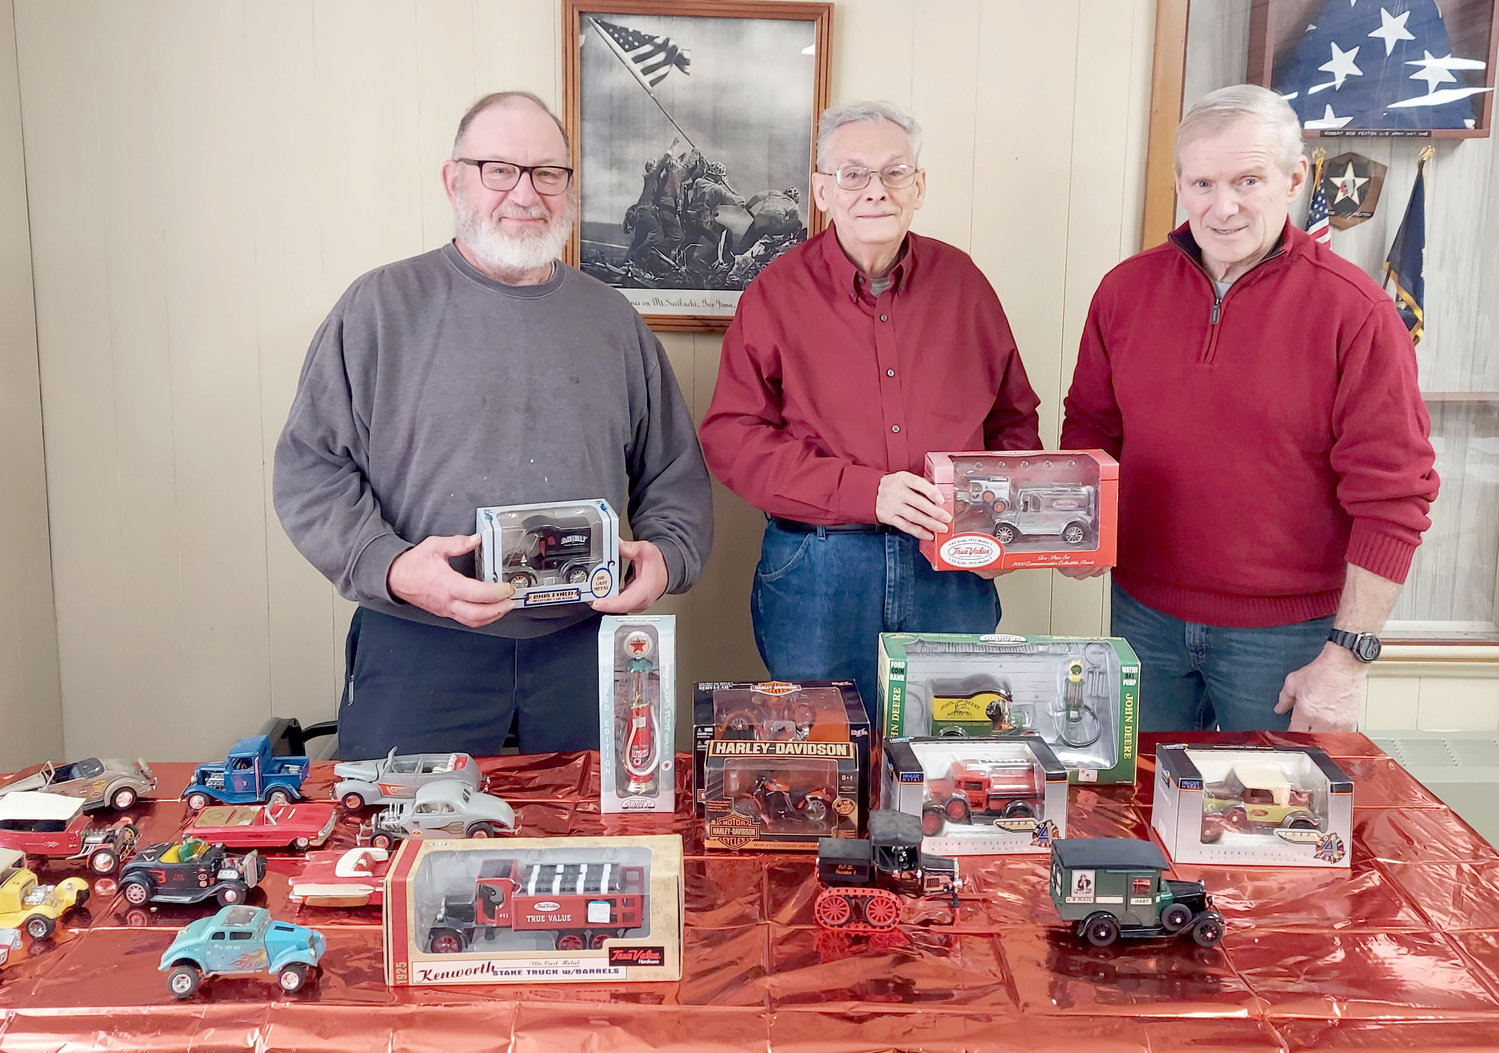 The Oriska Valley Seniors met on Thursday, Jan. 5, at the American Legion in Oriskany Falls.  The speaker was Mike Silliman, a member of the Mohican Model A Ford Club, who talked about his collection of model cars and die-cast banks with a display of cars. The presentation included a discussion of the early years, 1898-1931, that Henry Ford manufactured cars. In 1924, he produced his 10 millionth Model T. In 1927, he manufactured his last Model T. In 1928, production started on Model A’s which ended in 1931 when he manufactured his 5 millionth Model A. From left: Howard Henty; Mike Silliman, and Eric Howard.